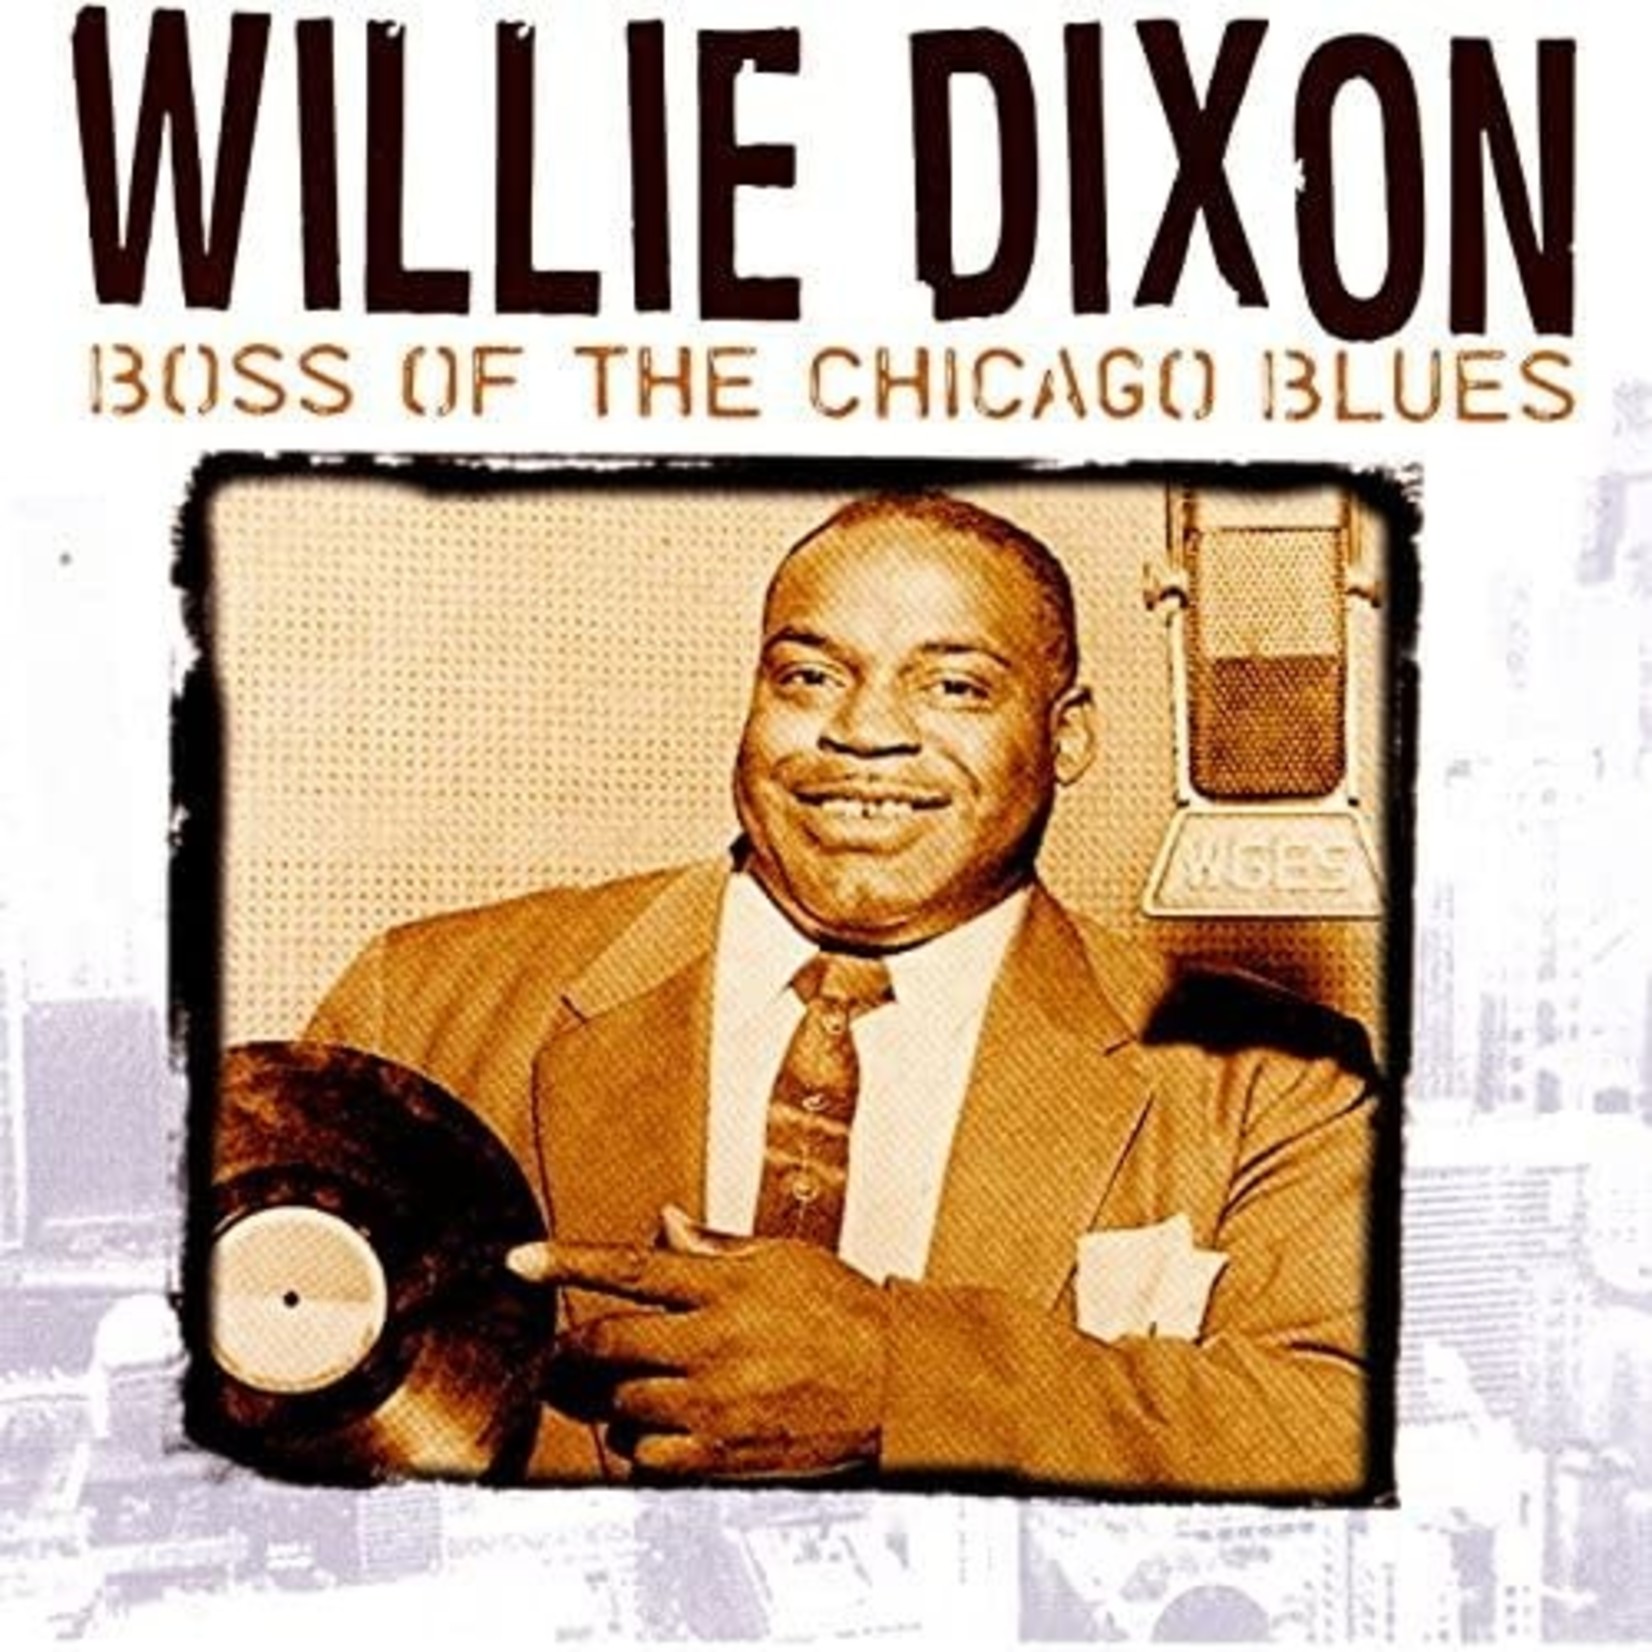 Willie Dixon - Boss Of The Chicago Blues [CD]